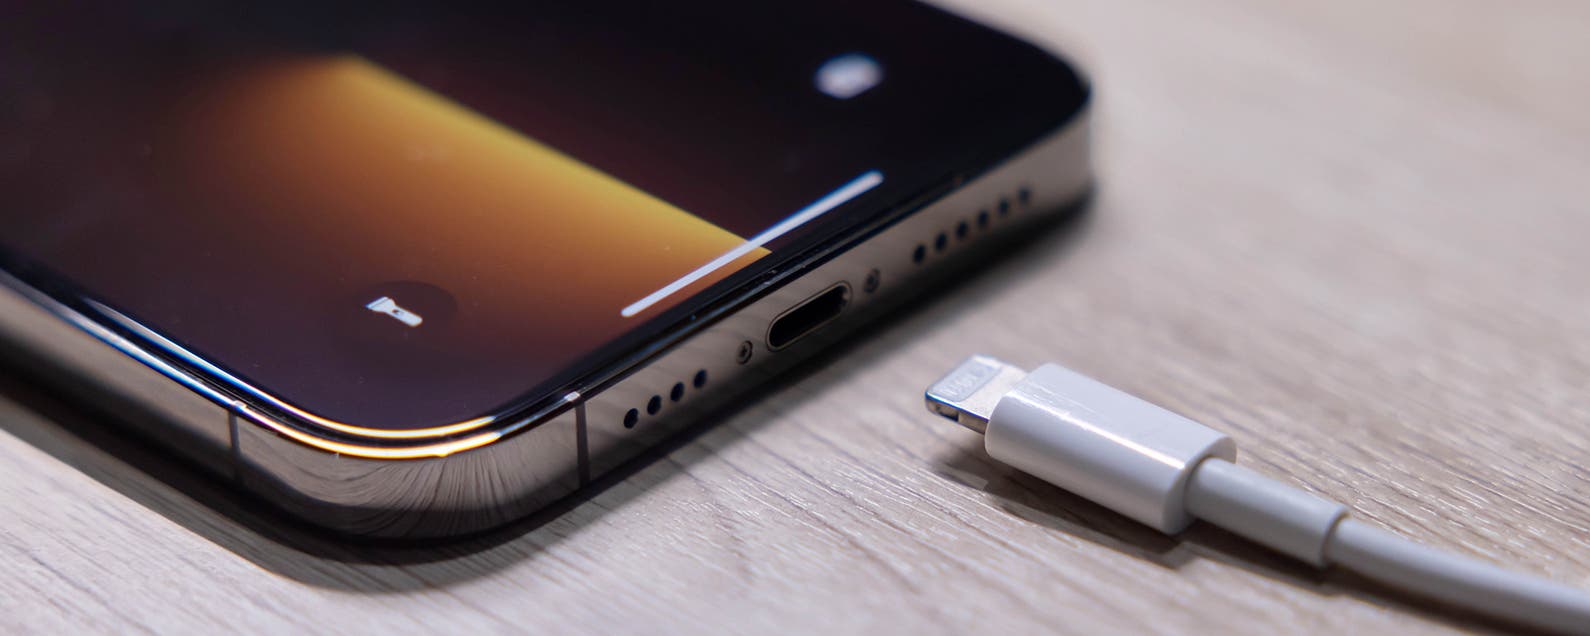 iphone x lightning connector